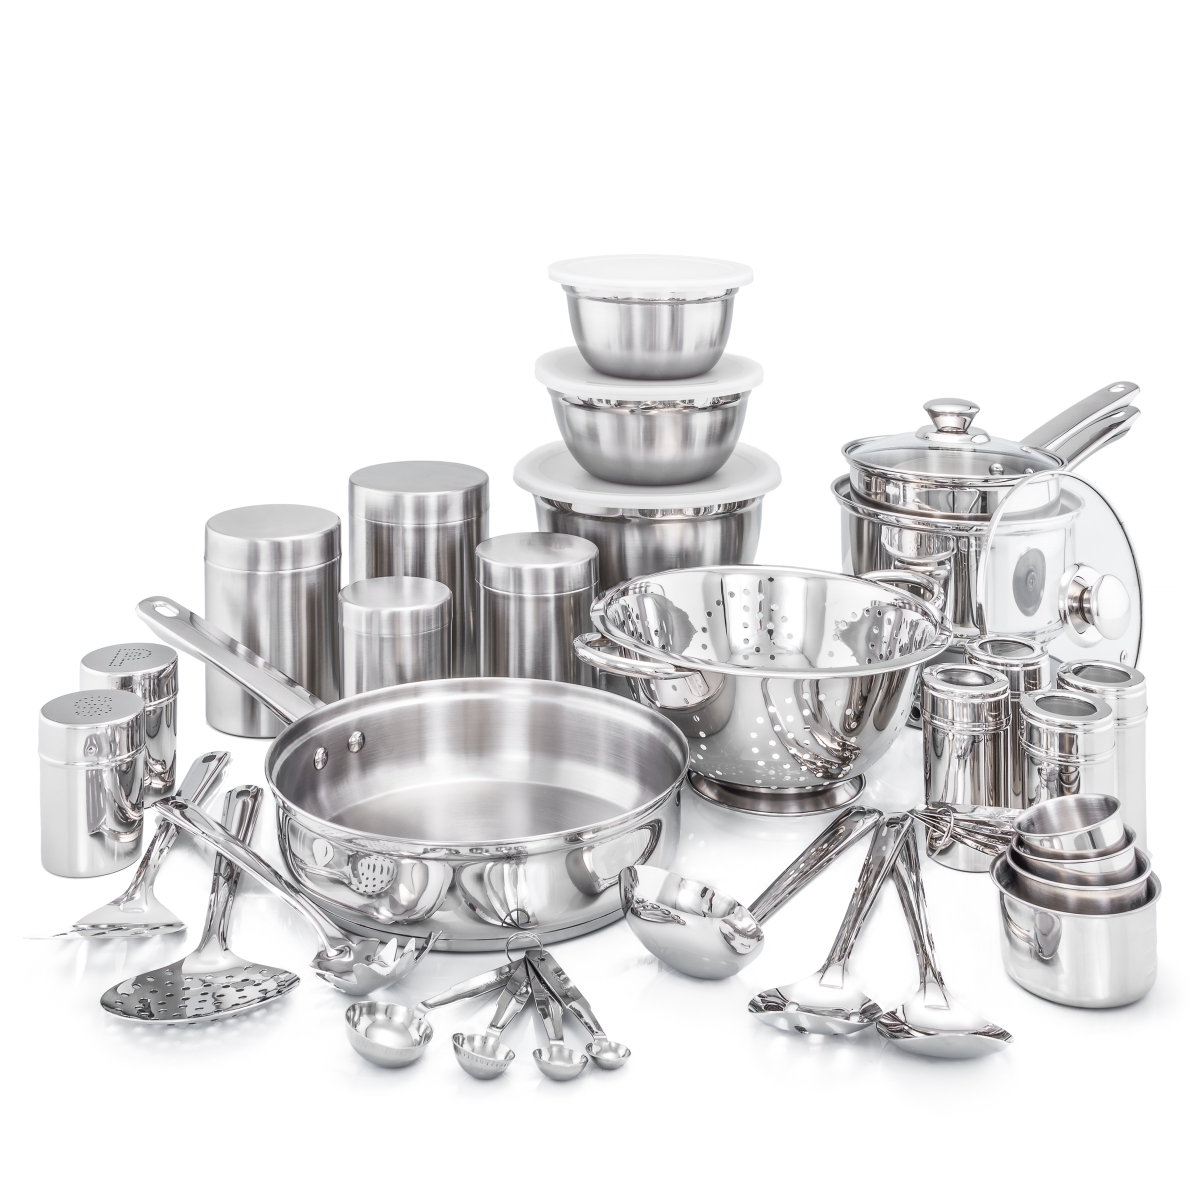 1346 Kitchen In A Box Stainless Steel Cookware Set - 36 Piece